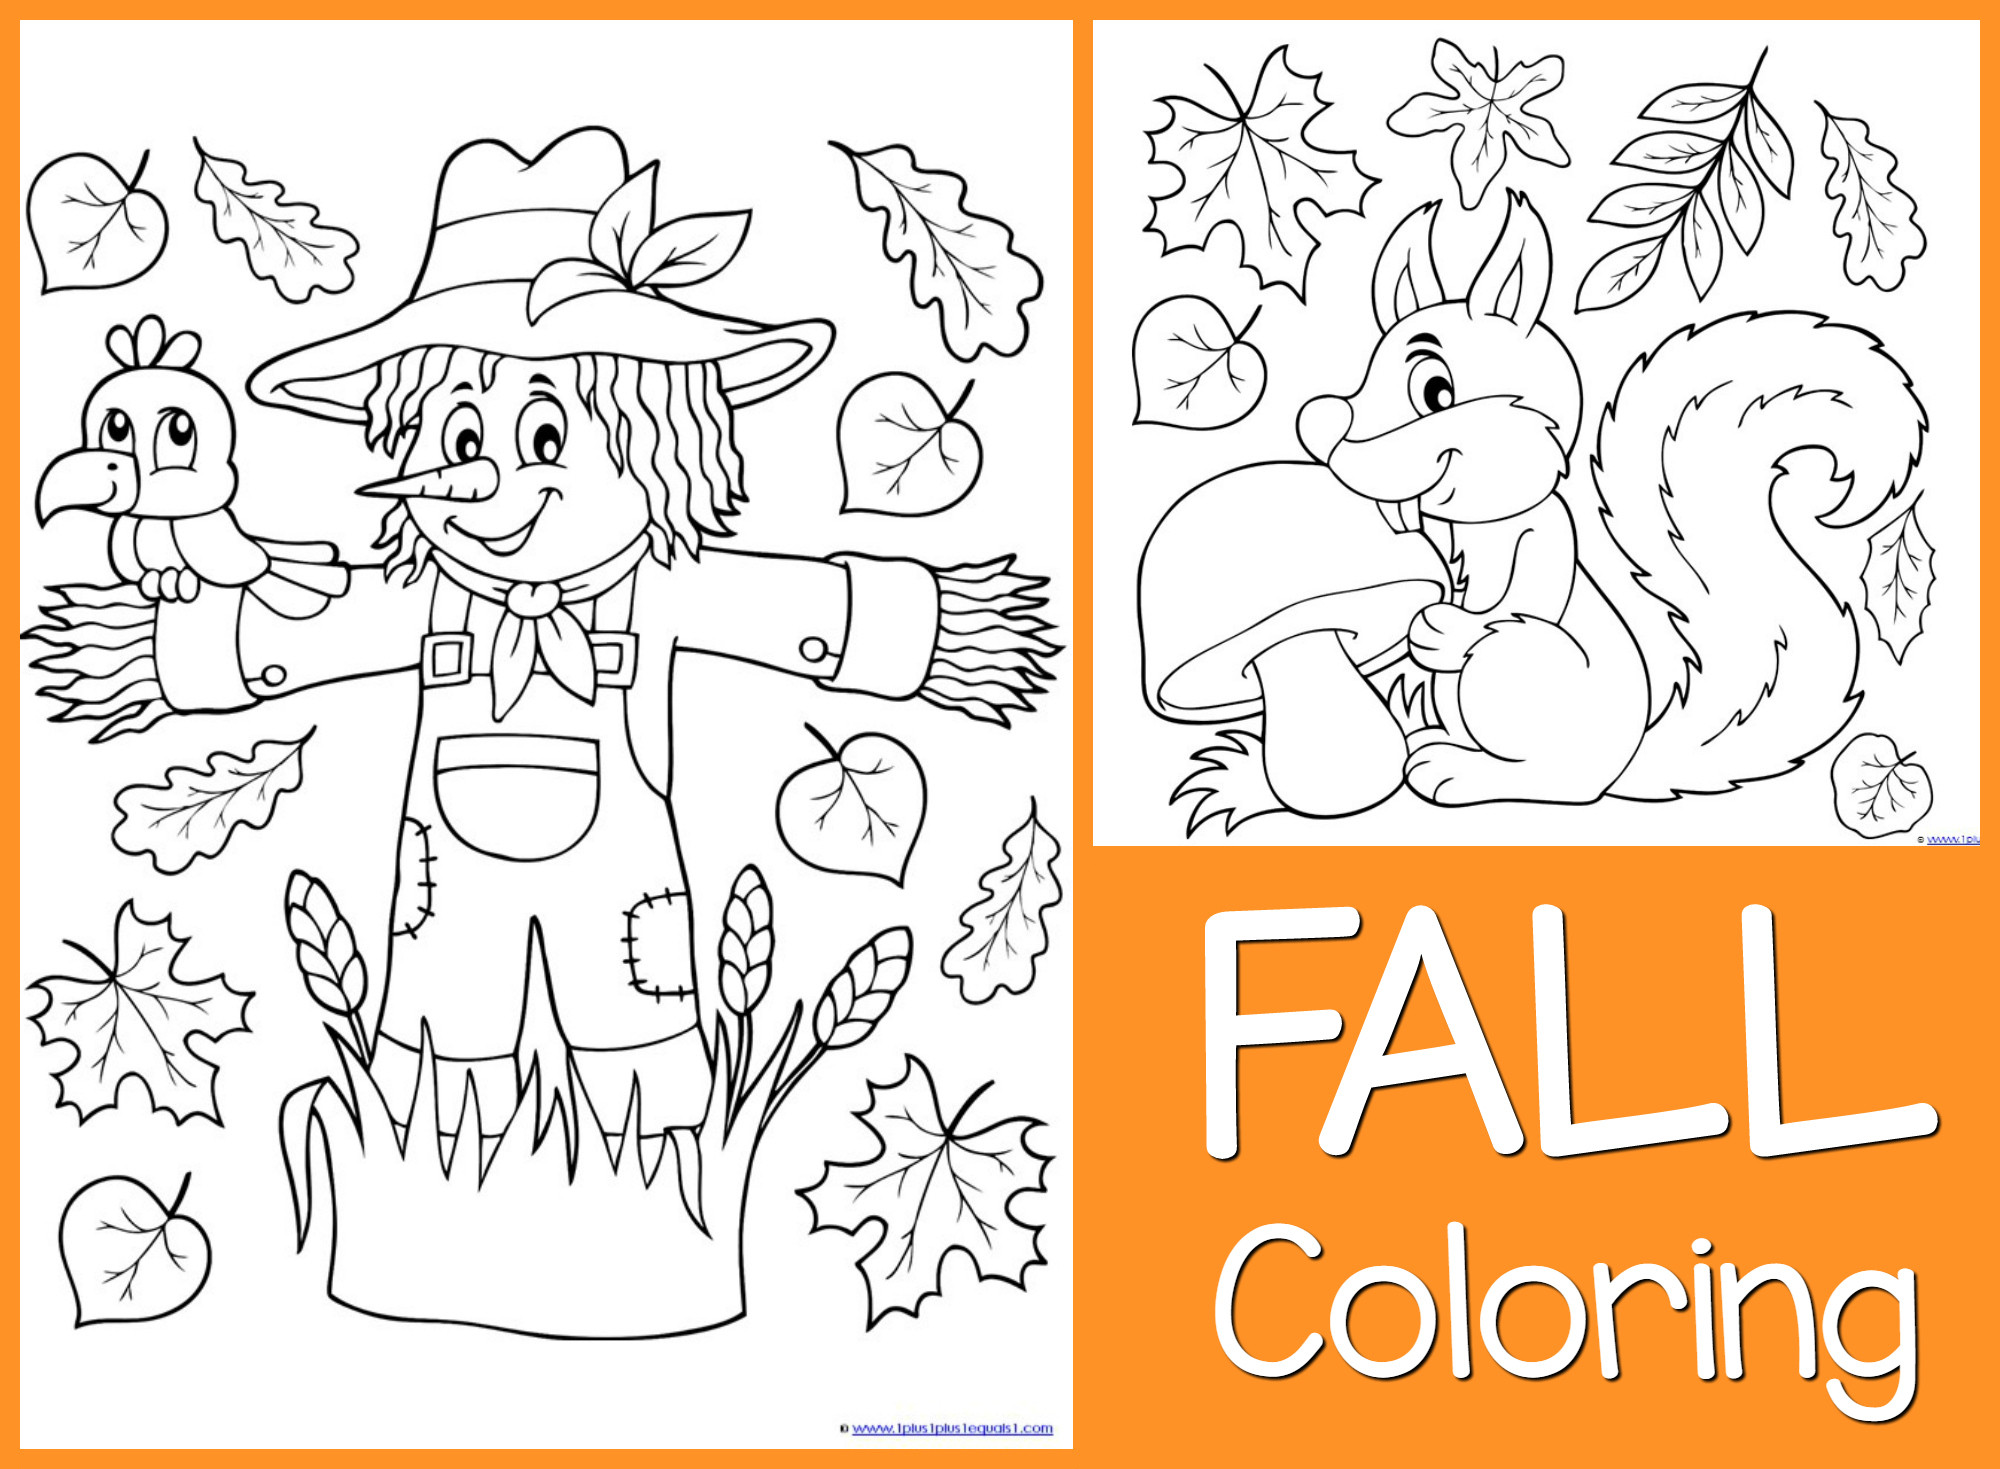 Fall Coloring Pages Free Printable
 Just Color Free Coloring Printables